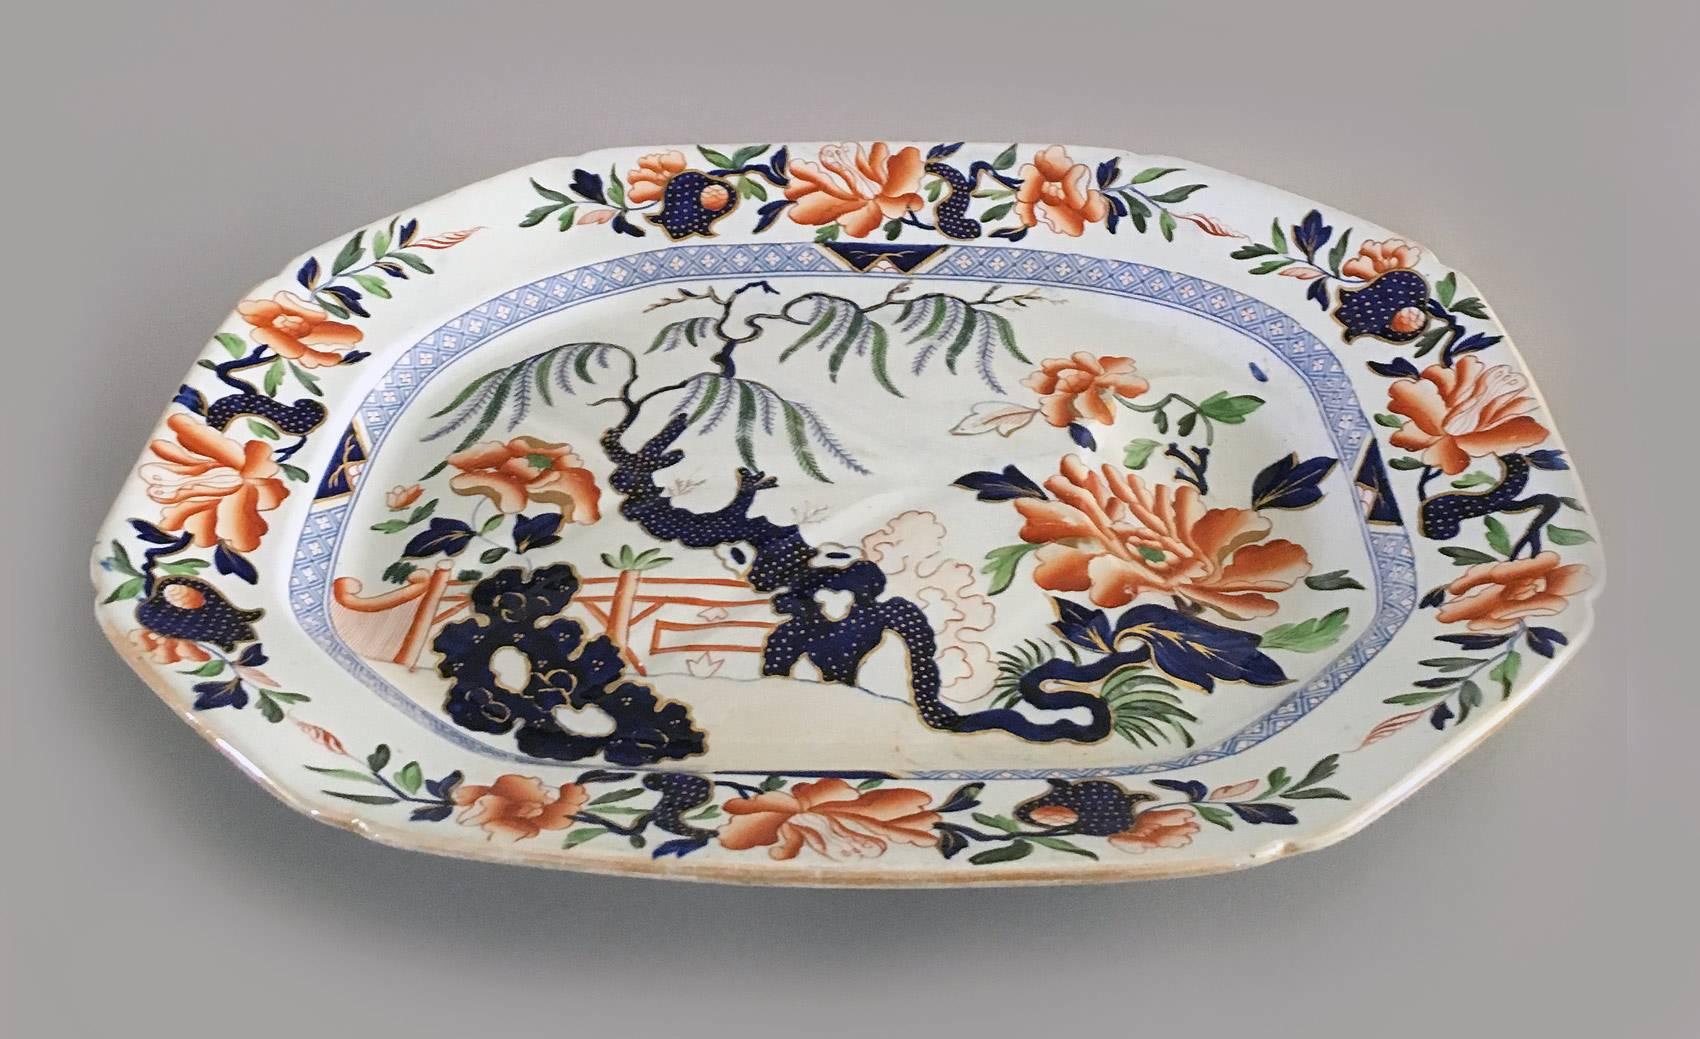 A large Hicks & Meigh Staffordshire meat platter, decorated with peonies and a willow tree in the Japan colors of cobalt blue and orange with gilding. The back has the blue printed mark “Stone China” no. 7 with the royal coat-of-arms with an inner